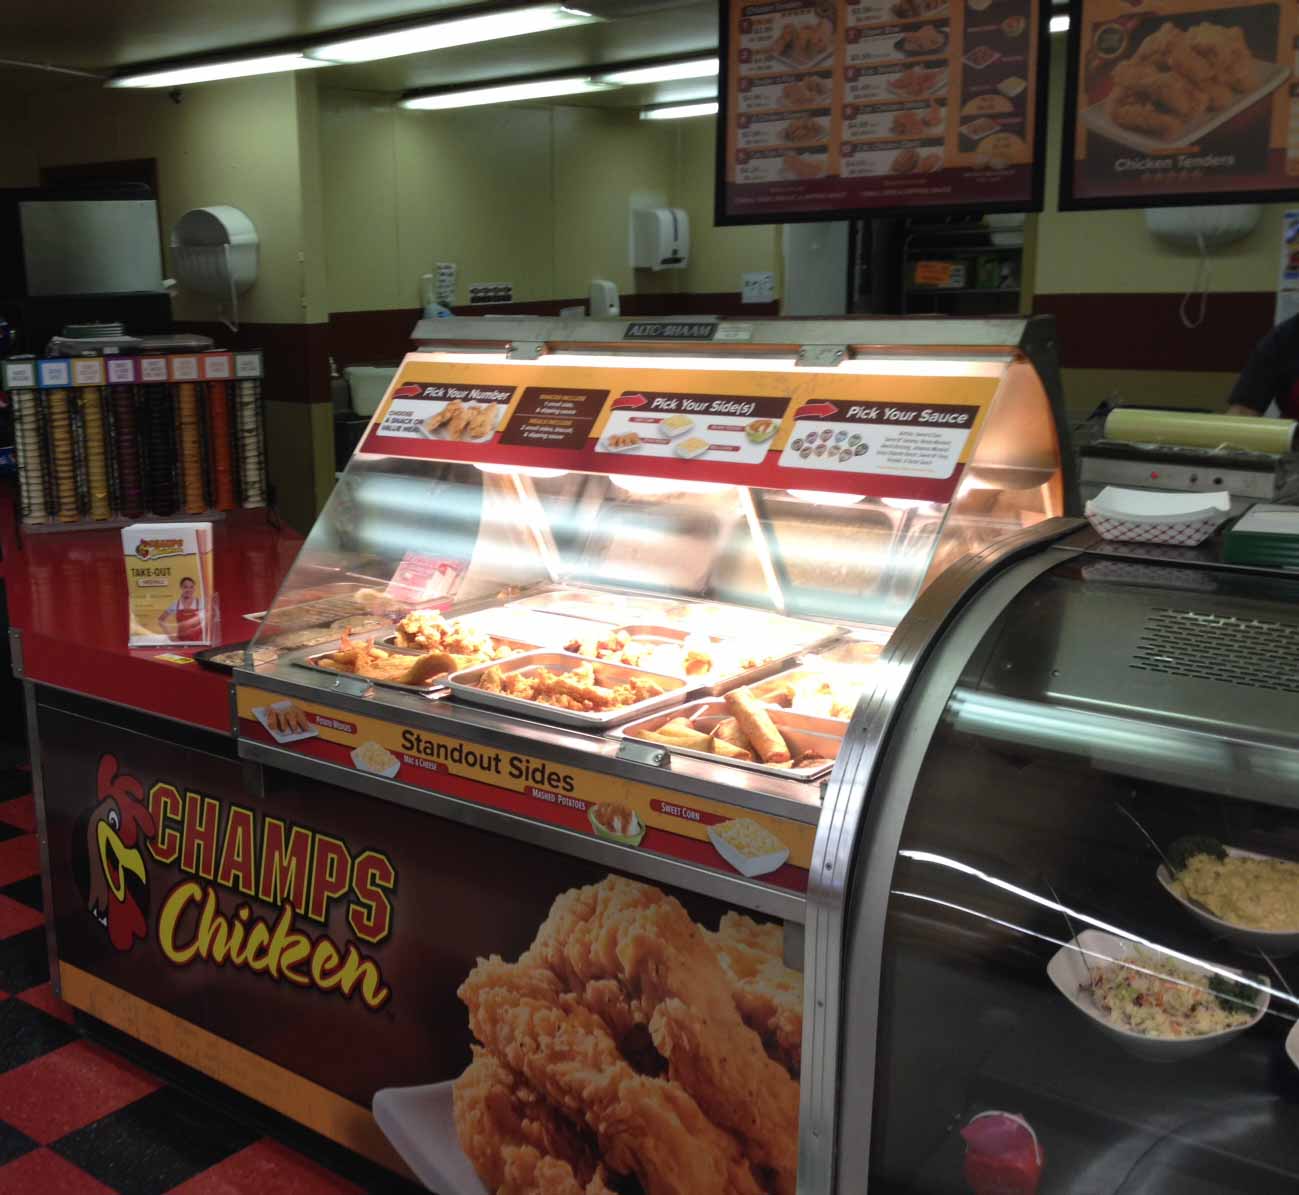 Chicken opens for business at the Columbia Harvest Foods in Umatilla, OR